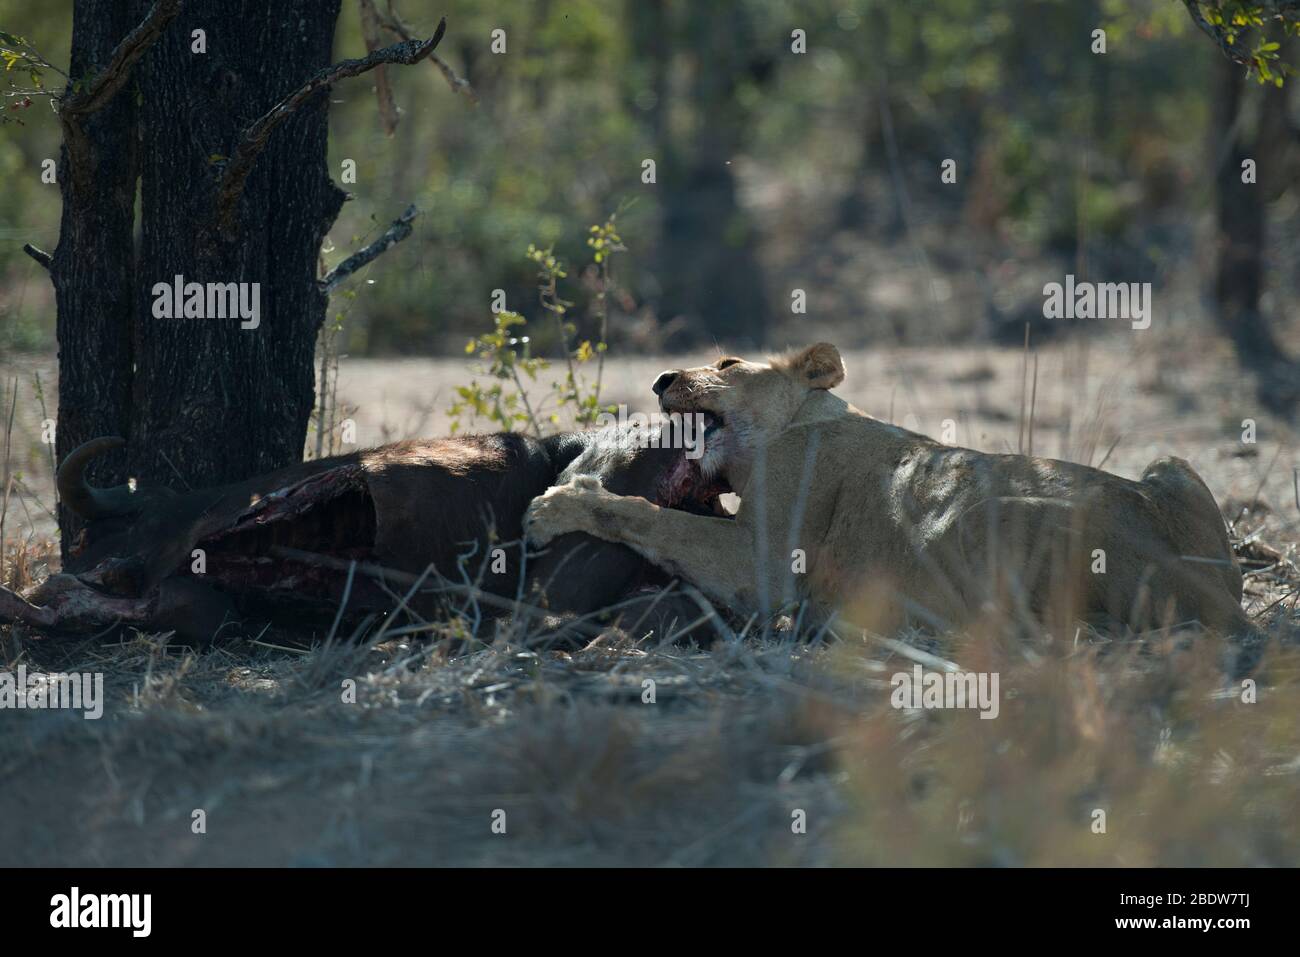 Lioness, Panthera leo, eating kill, Kruger National Park, Mpumalanga province, South Africa, Africa Stock Photo